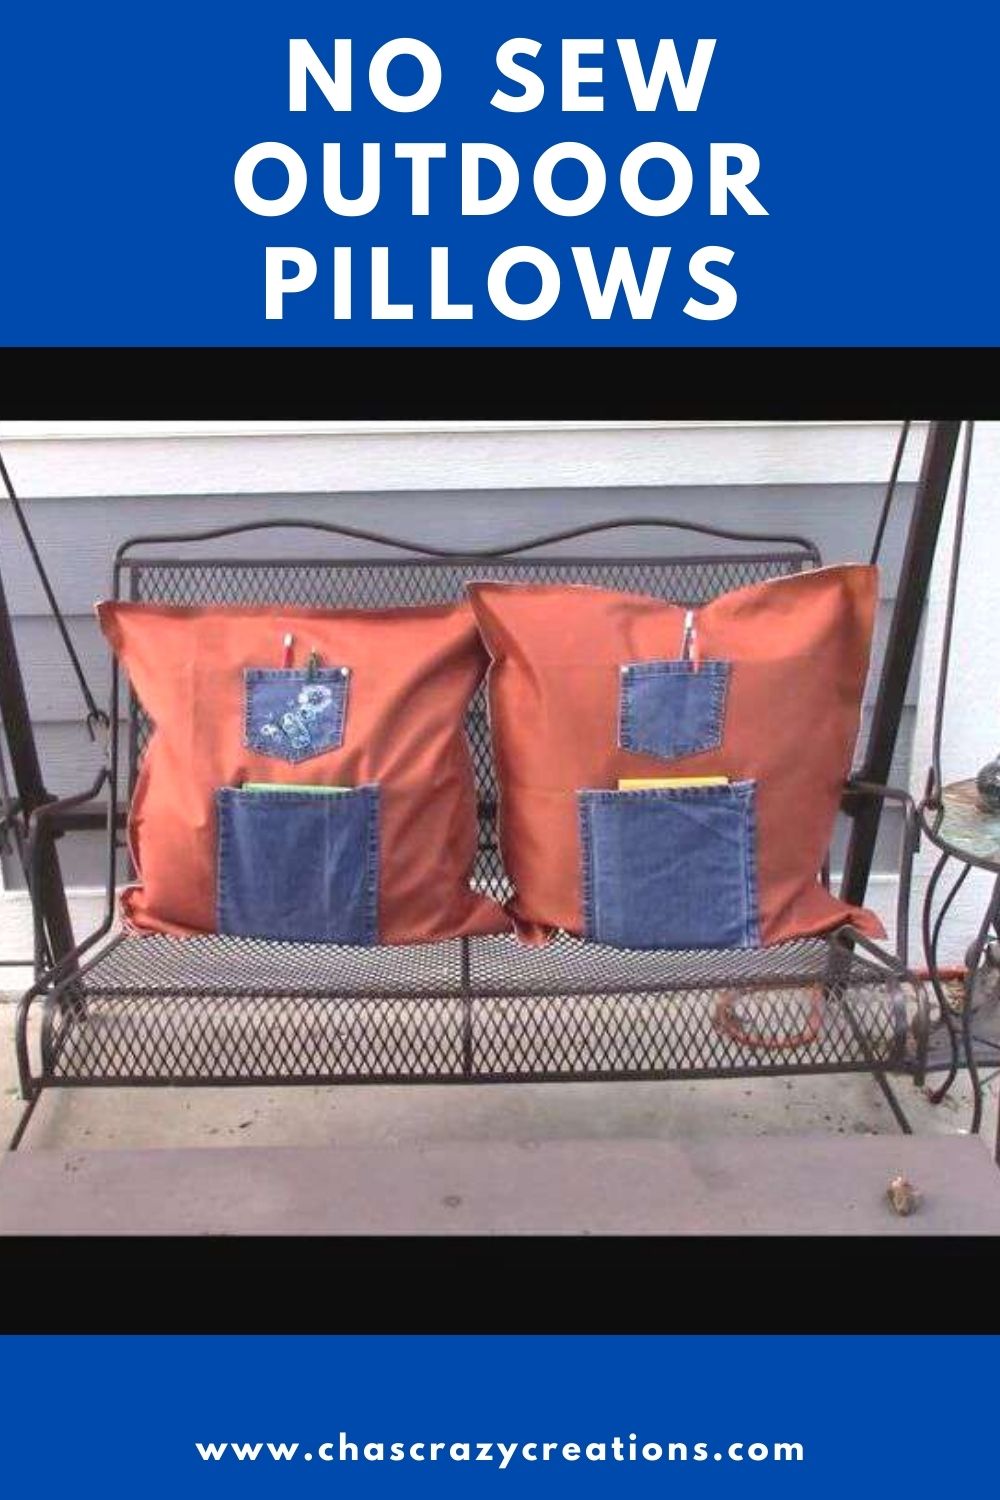 No Sew Outdoor Pillows With Journal/Pen Pockets